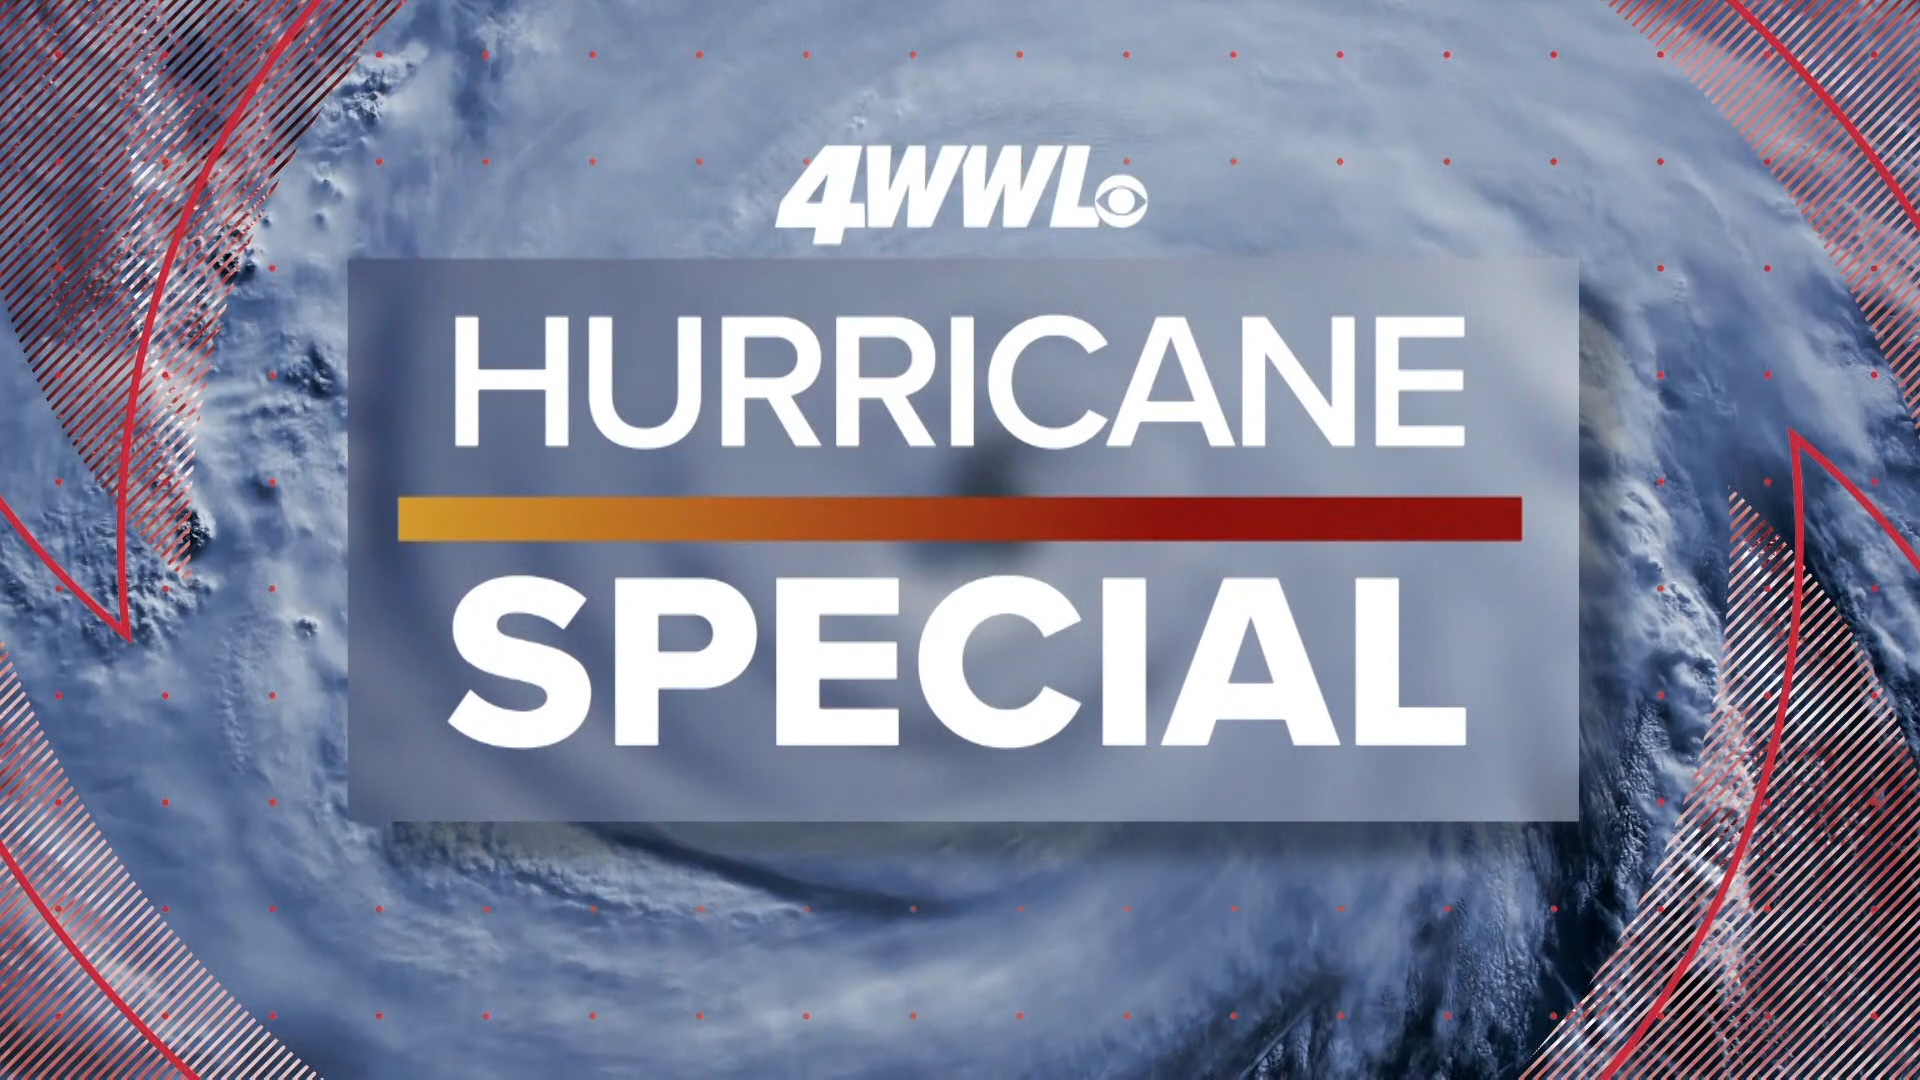 The WWL Weather team will have the latest on the active season forecast as well as updates on our local levee systems, how local parish leaders are preparing.